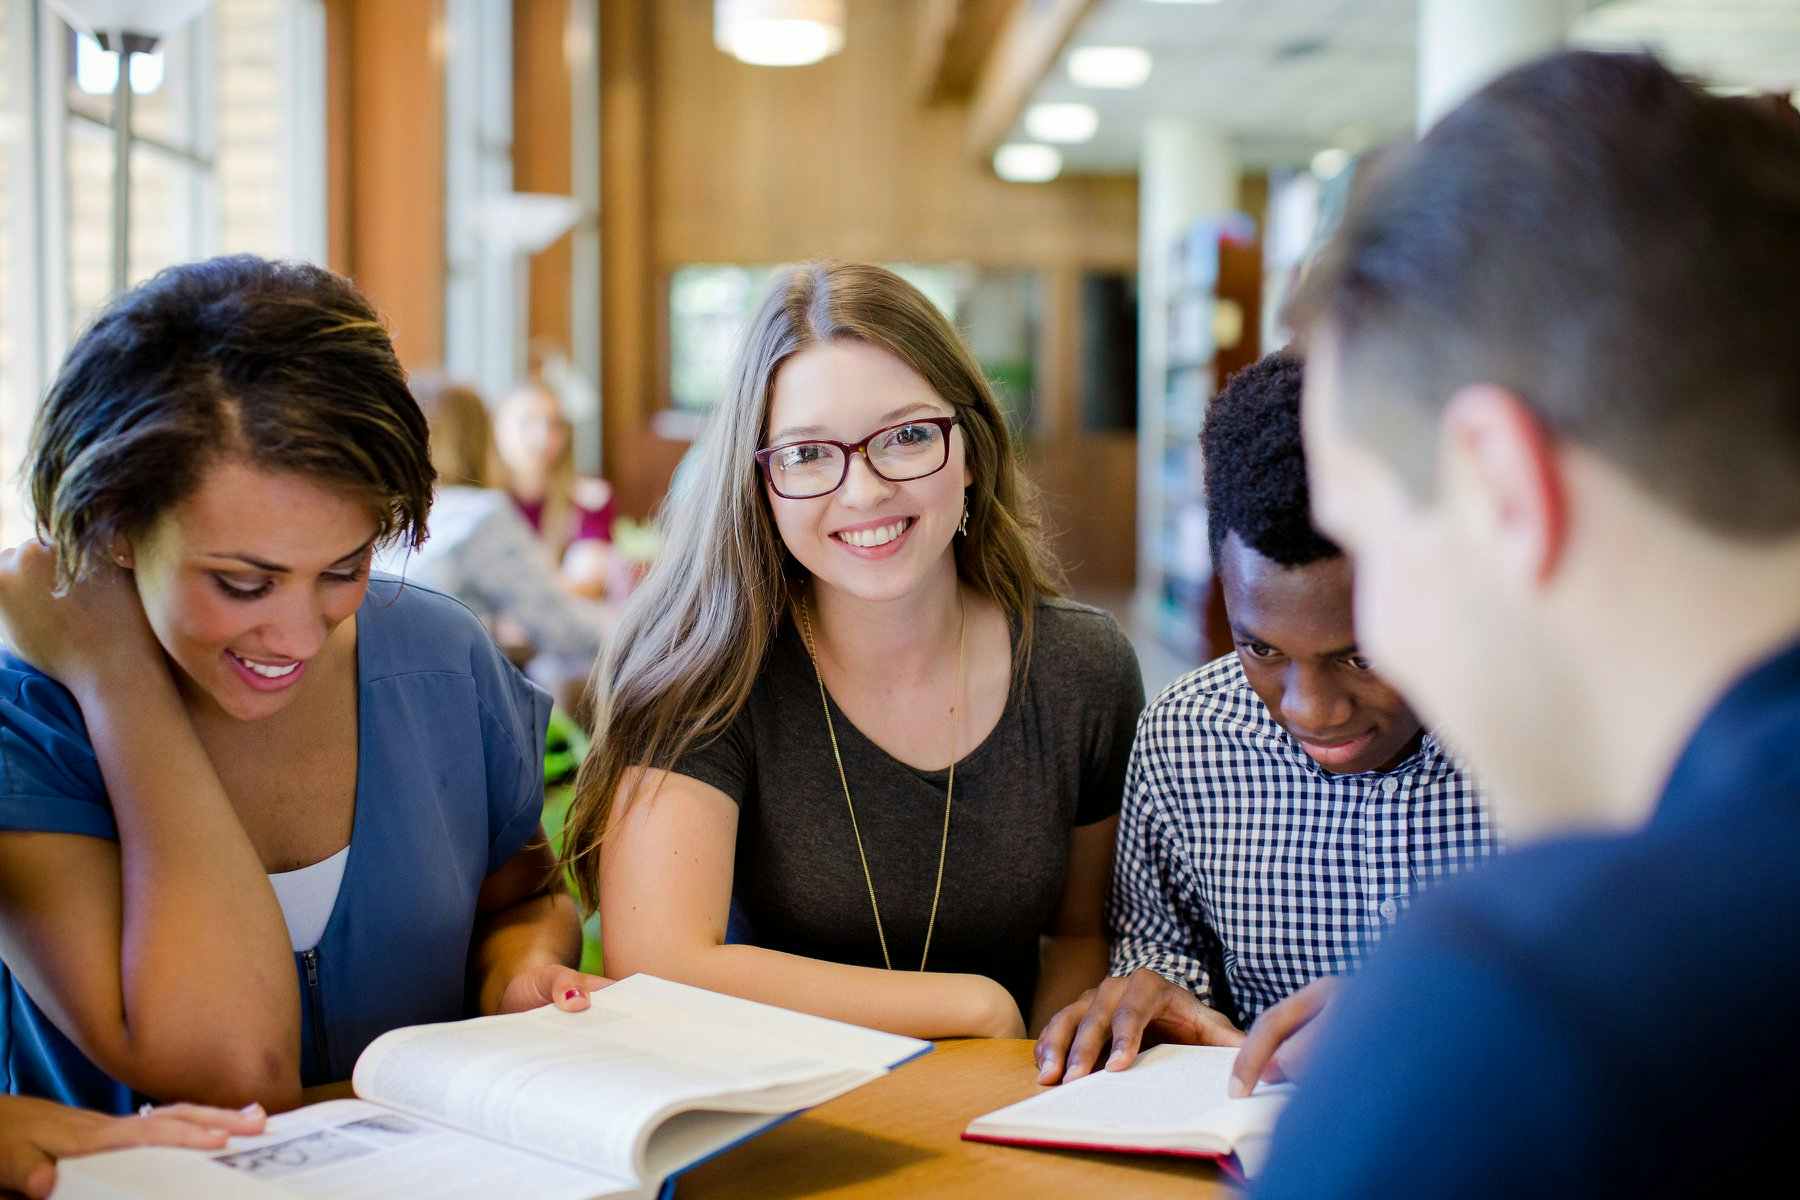 Students at College of the Ozarks studying at a table in a library.